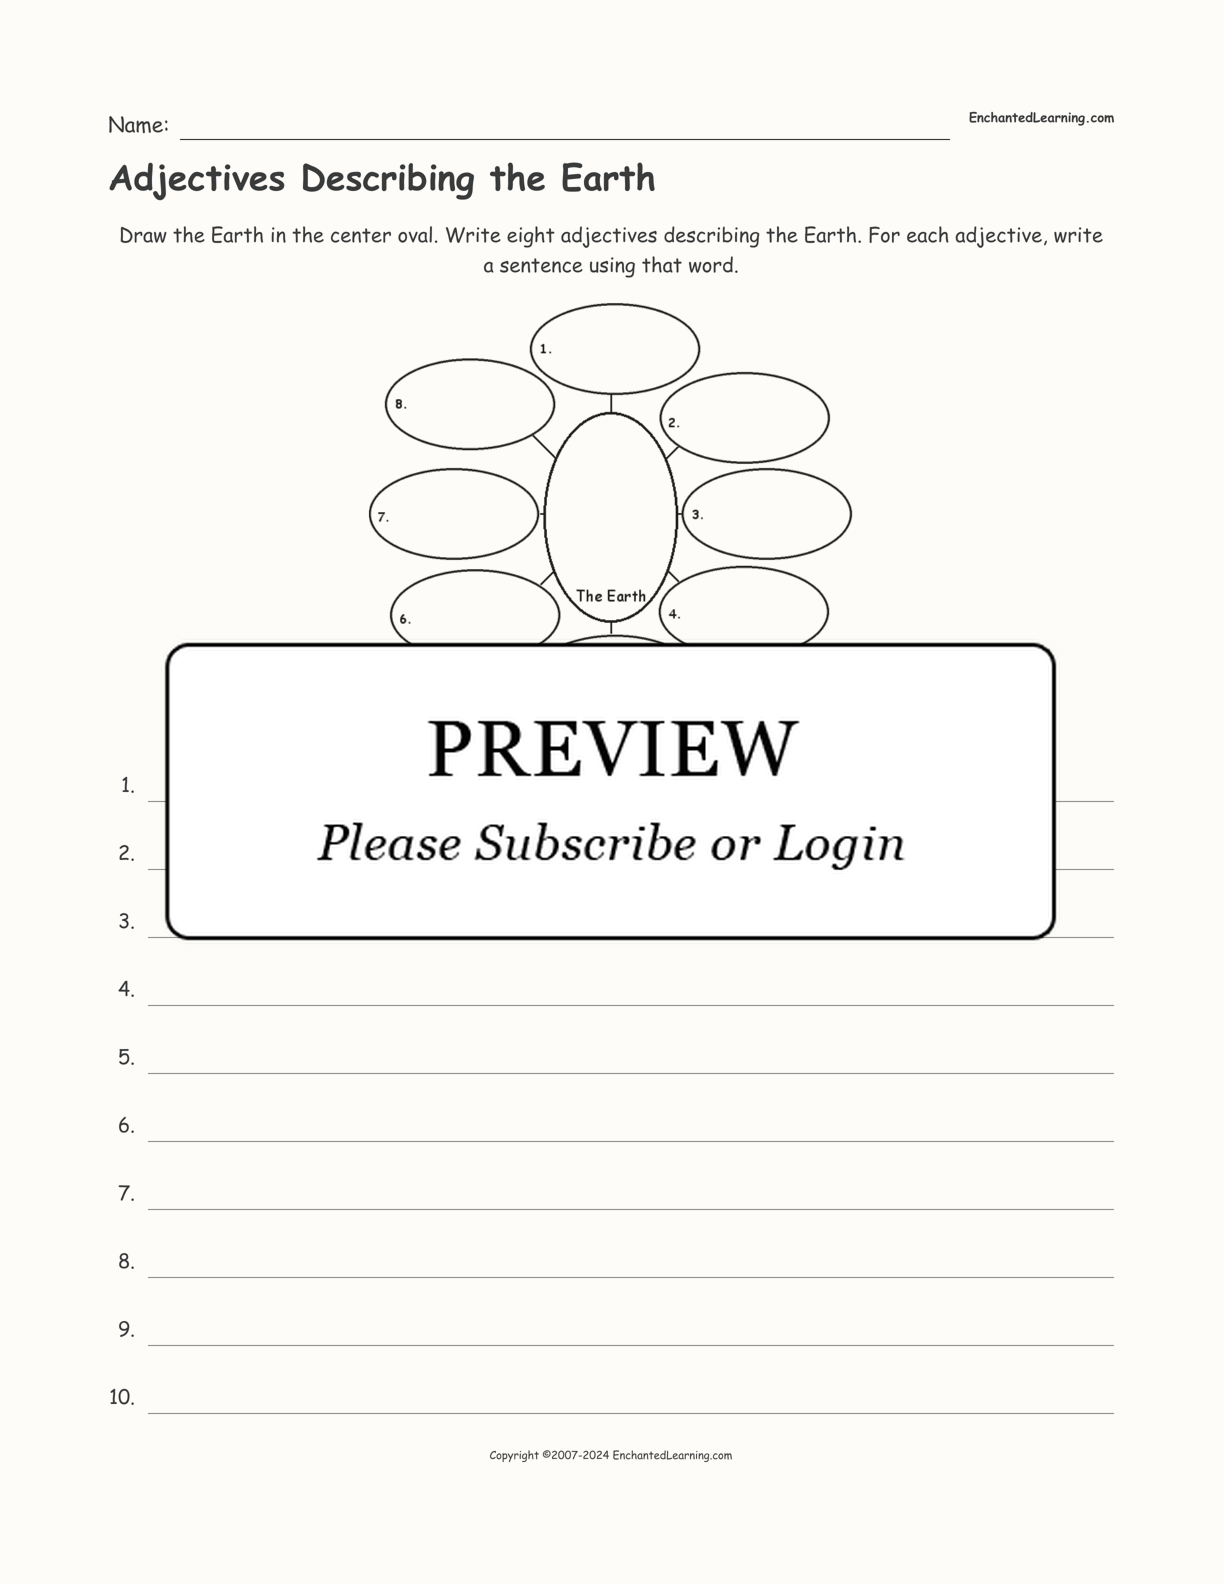 Adjectives Describing the Earth interactive worksheet page 1